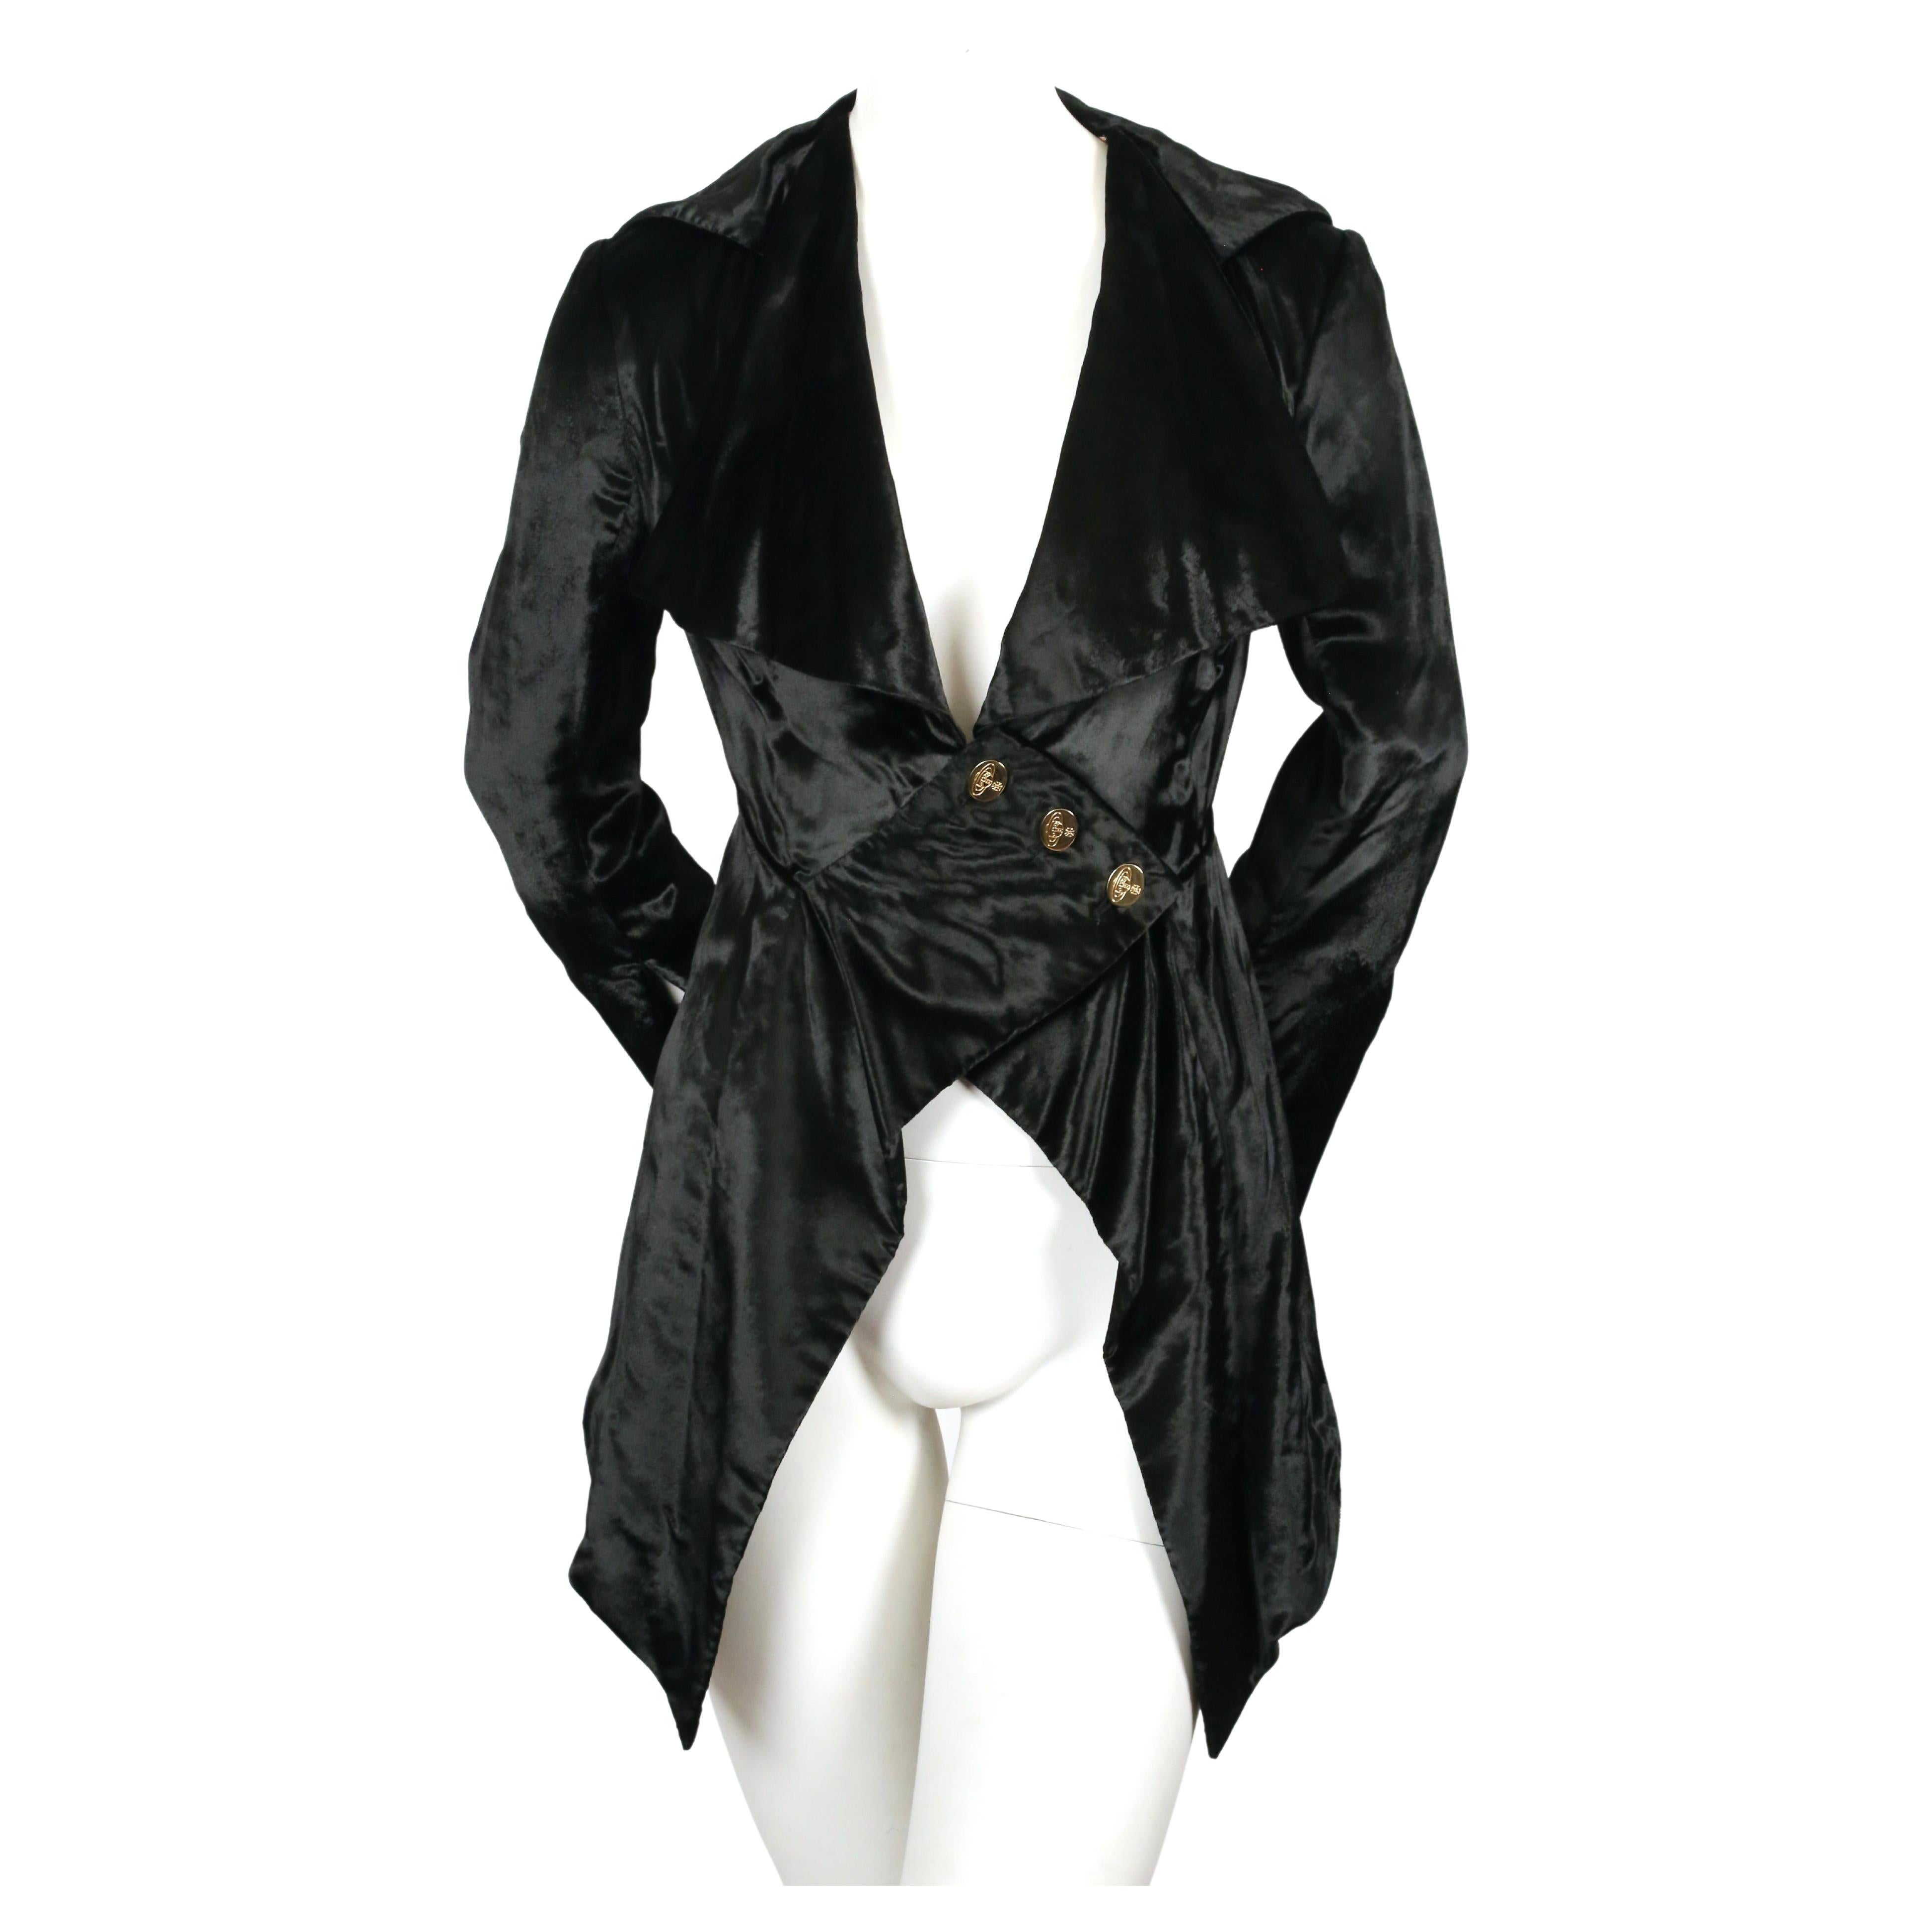 Very rare, jet-black, brushed velvet frock coat designed by Vivienne Westwood dating to her 1994 'On Liberty' collection as seen on the runway. Vivienne Westwood gold label which was her top range with very limited numbers made. 

Labeled a UK size